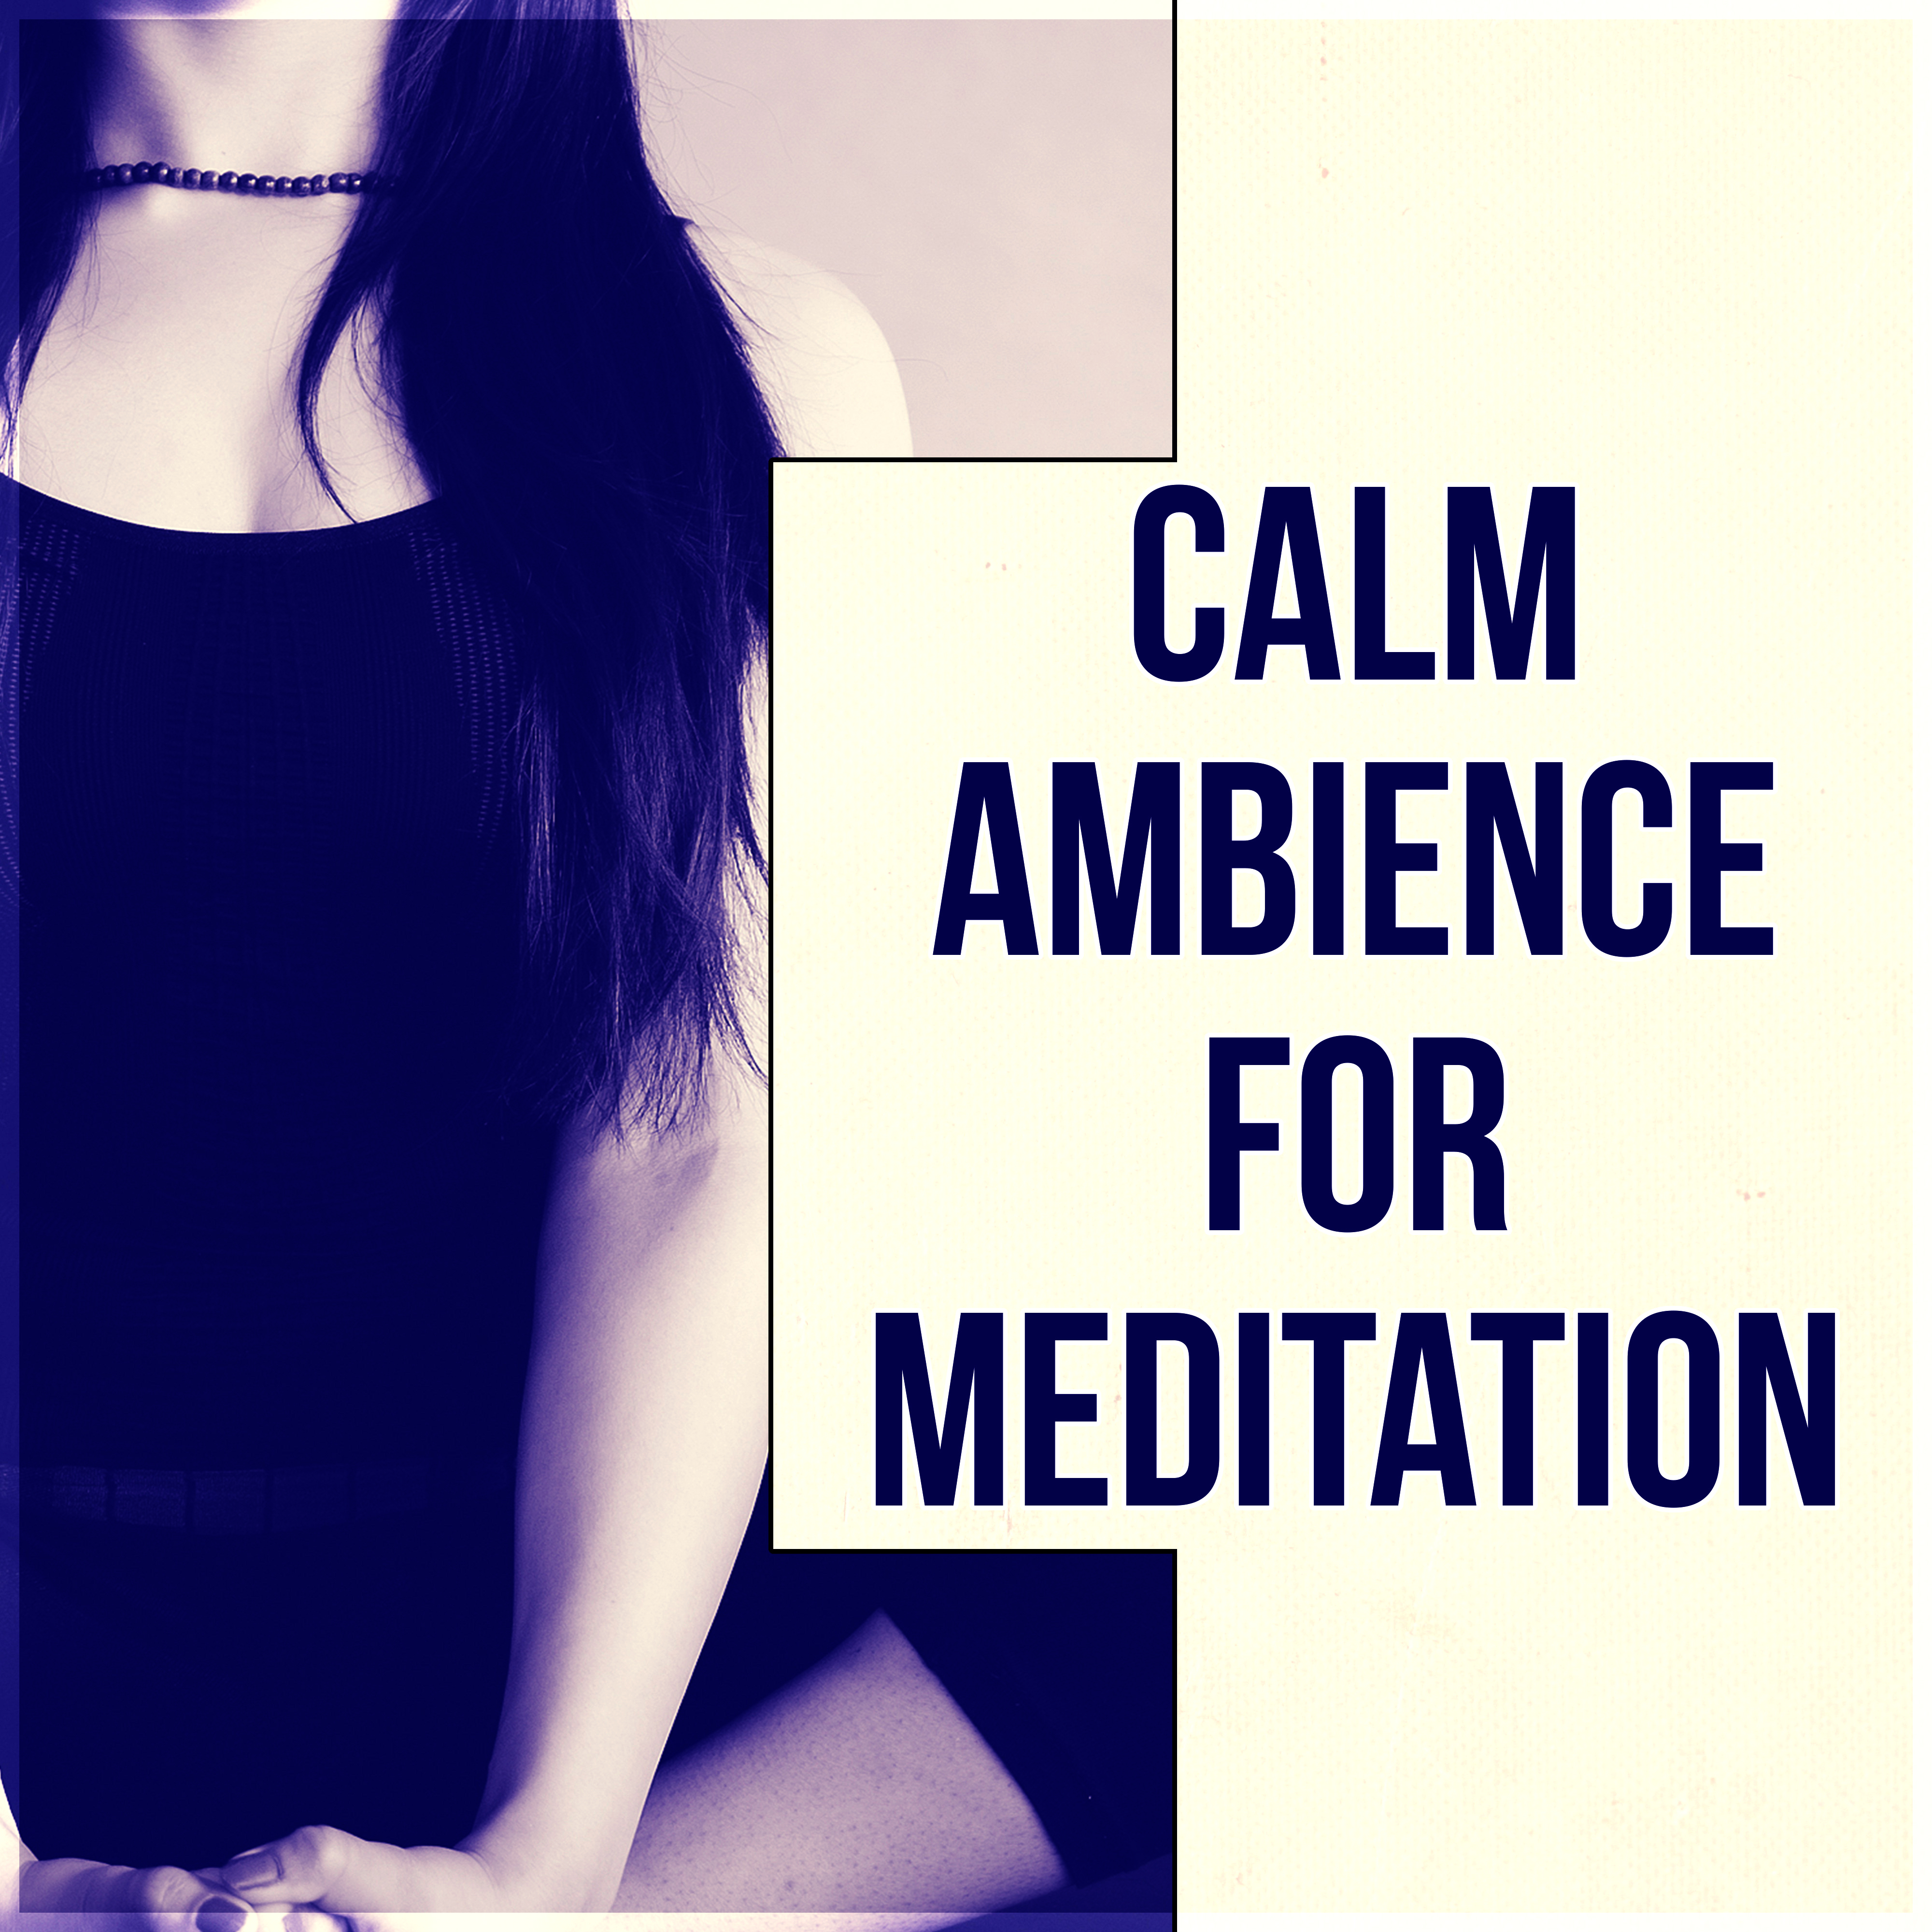 Calm Ambience for Meditation - Relaxing Sounds, Sounds of Nature, Reduce Stress, Yoga, Calm Music